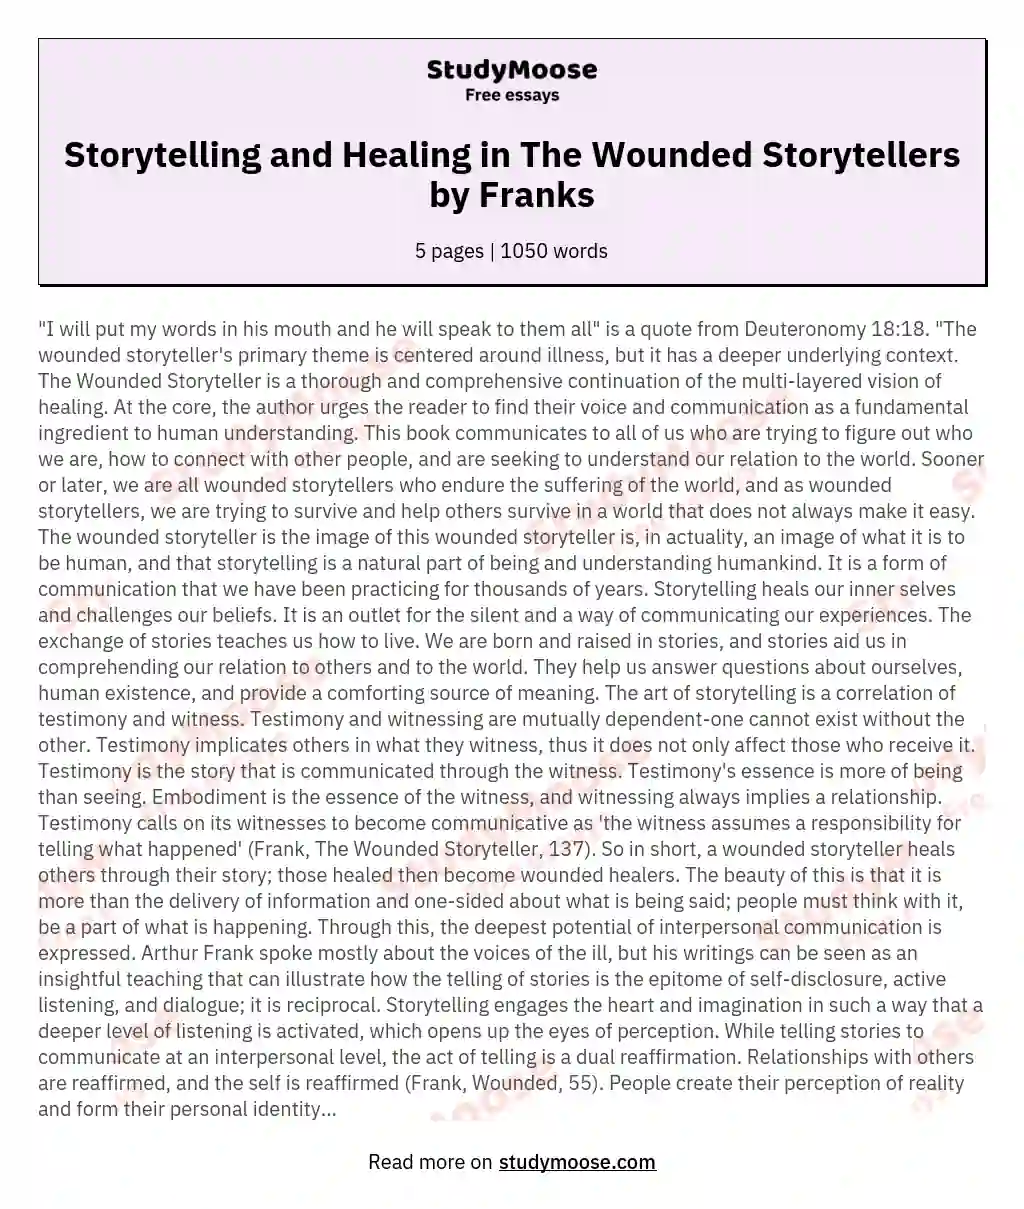 Storytelling and Healing in The Wounded Storytellers by Franks essay